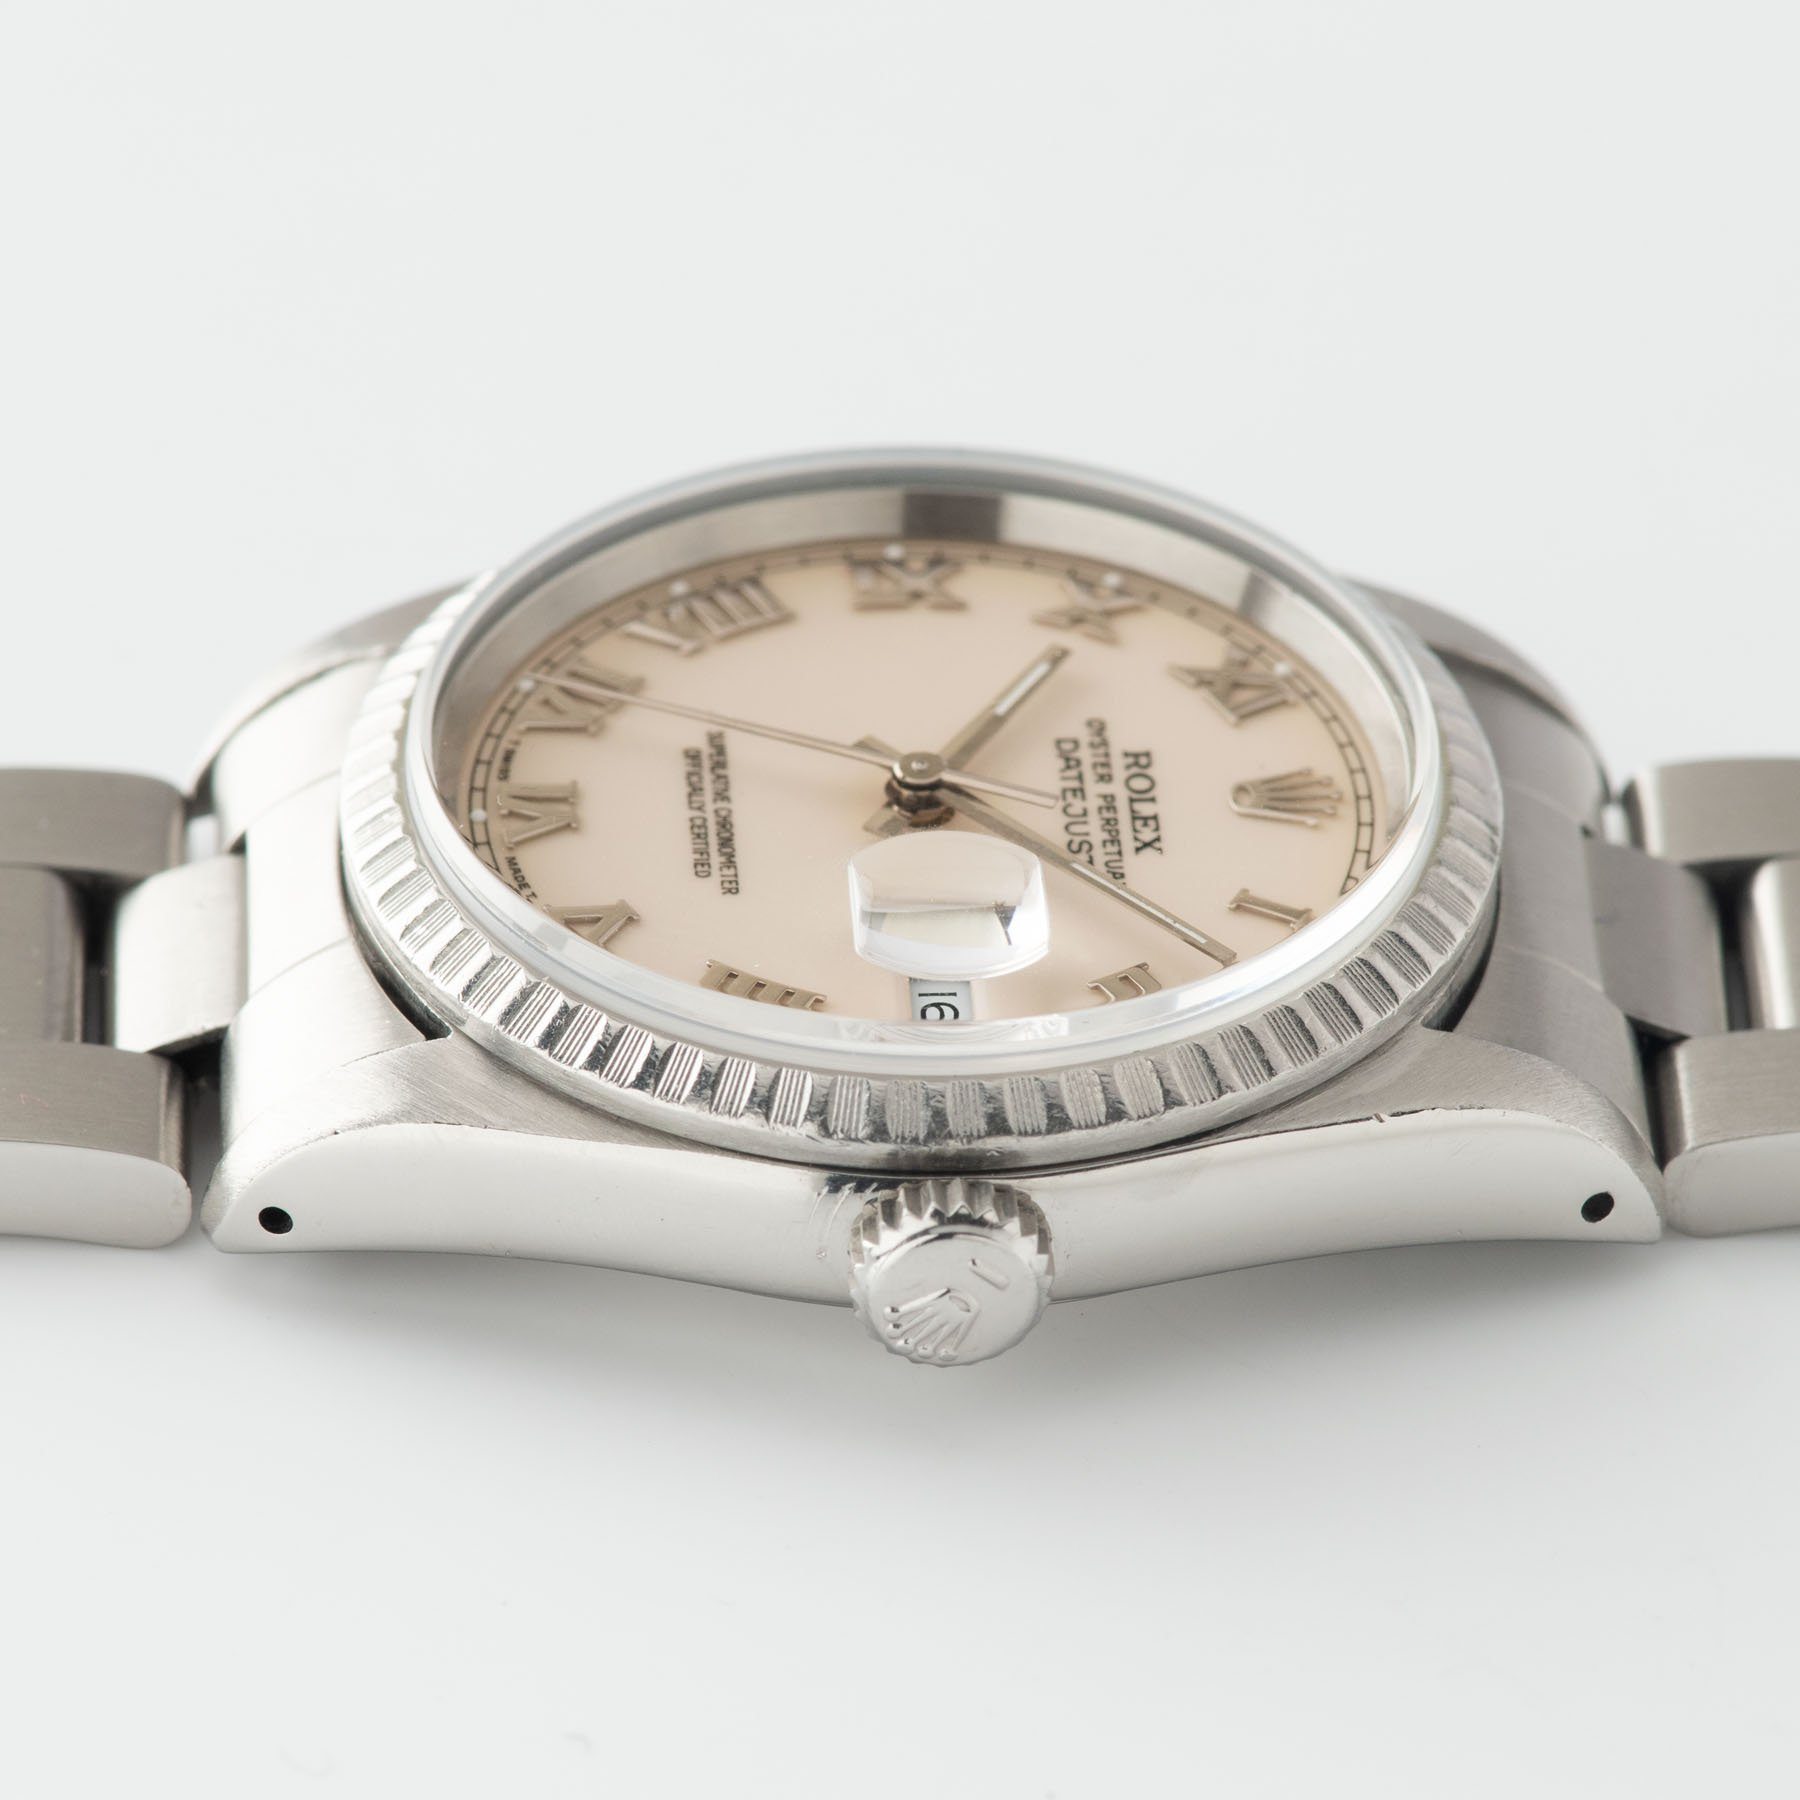 Rolex Datejust Cream Dial Reference 16220